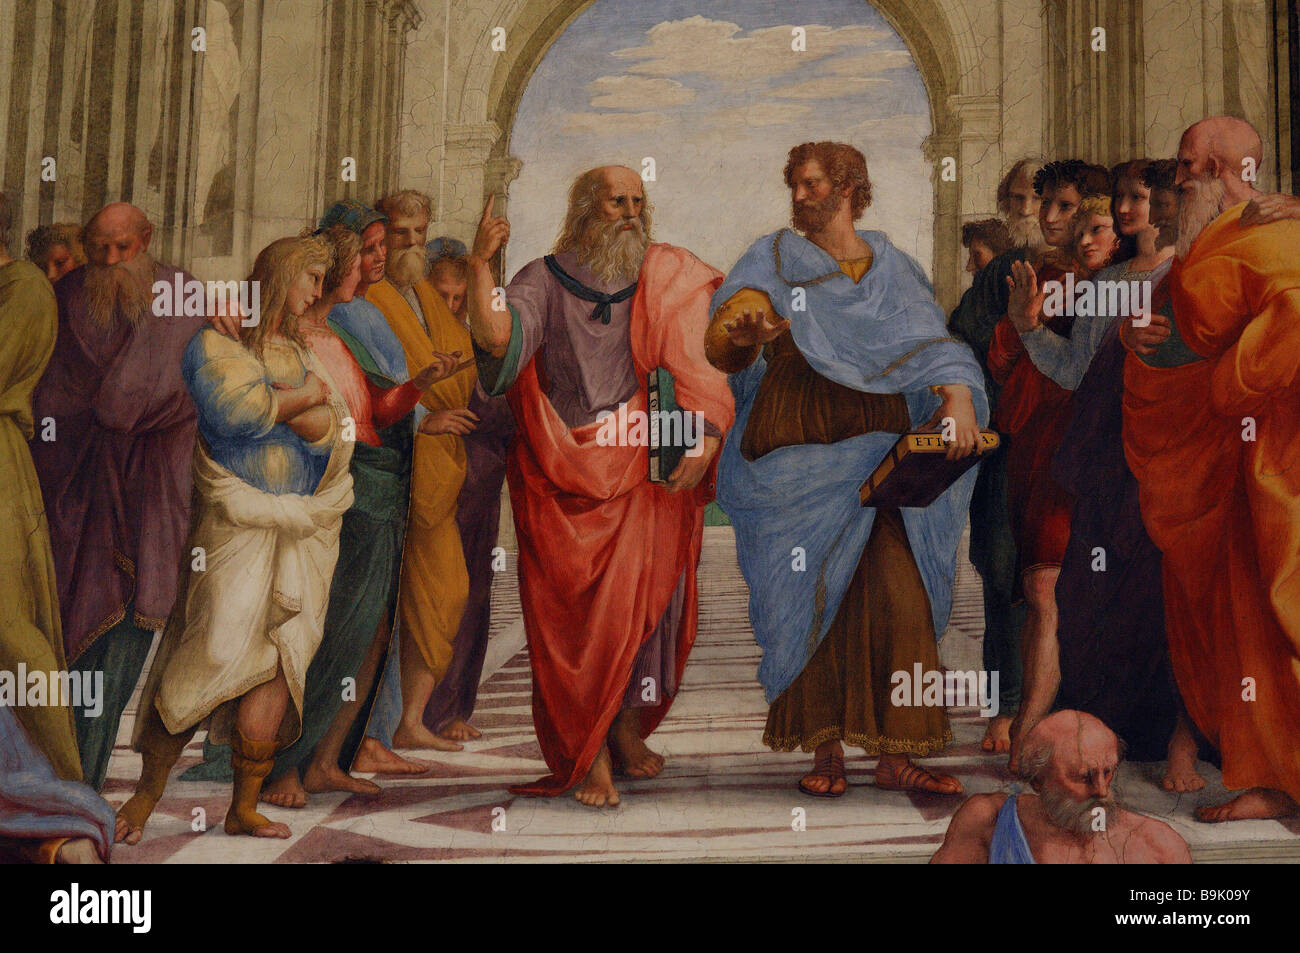 Italy, Lazio, Rome, Vatican Museum, detail of Plato and Aristotle School of Athens in the Signature room in the Raphael rooms Stock Photo